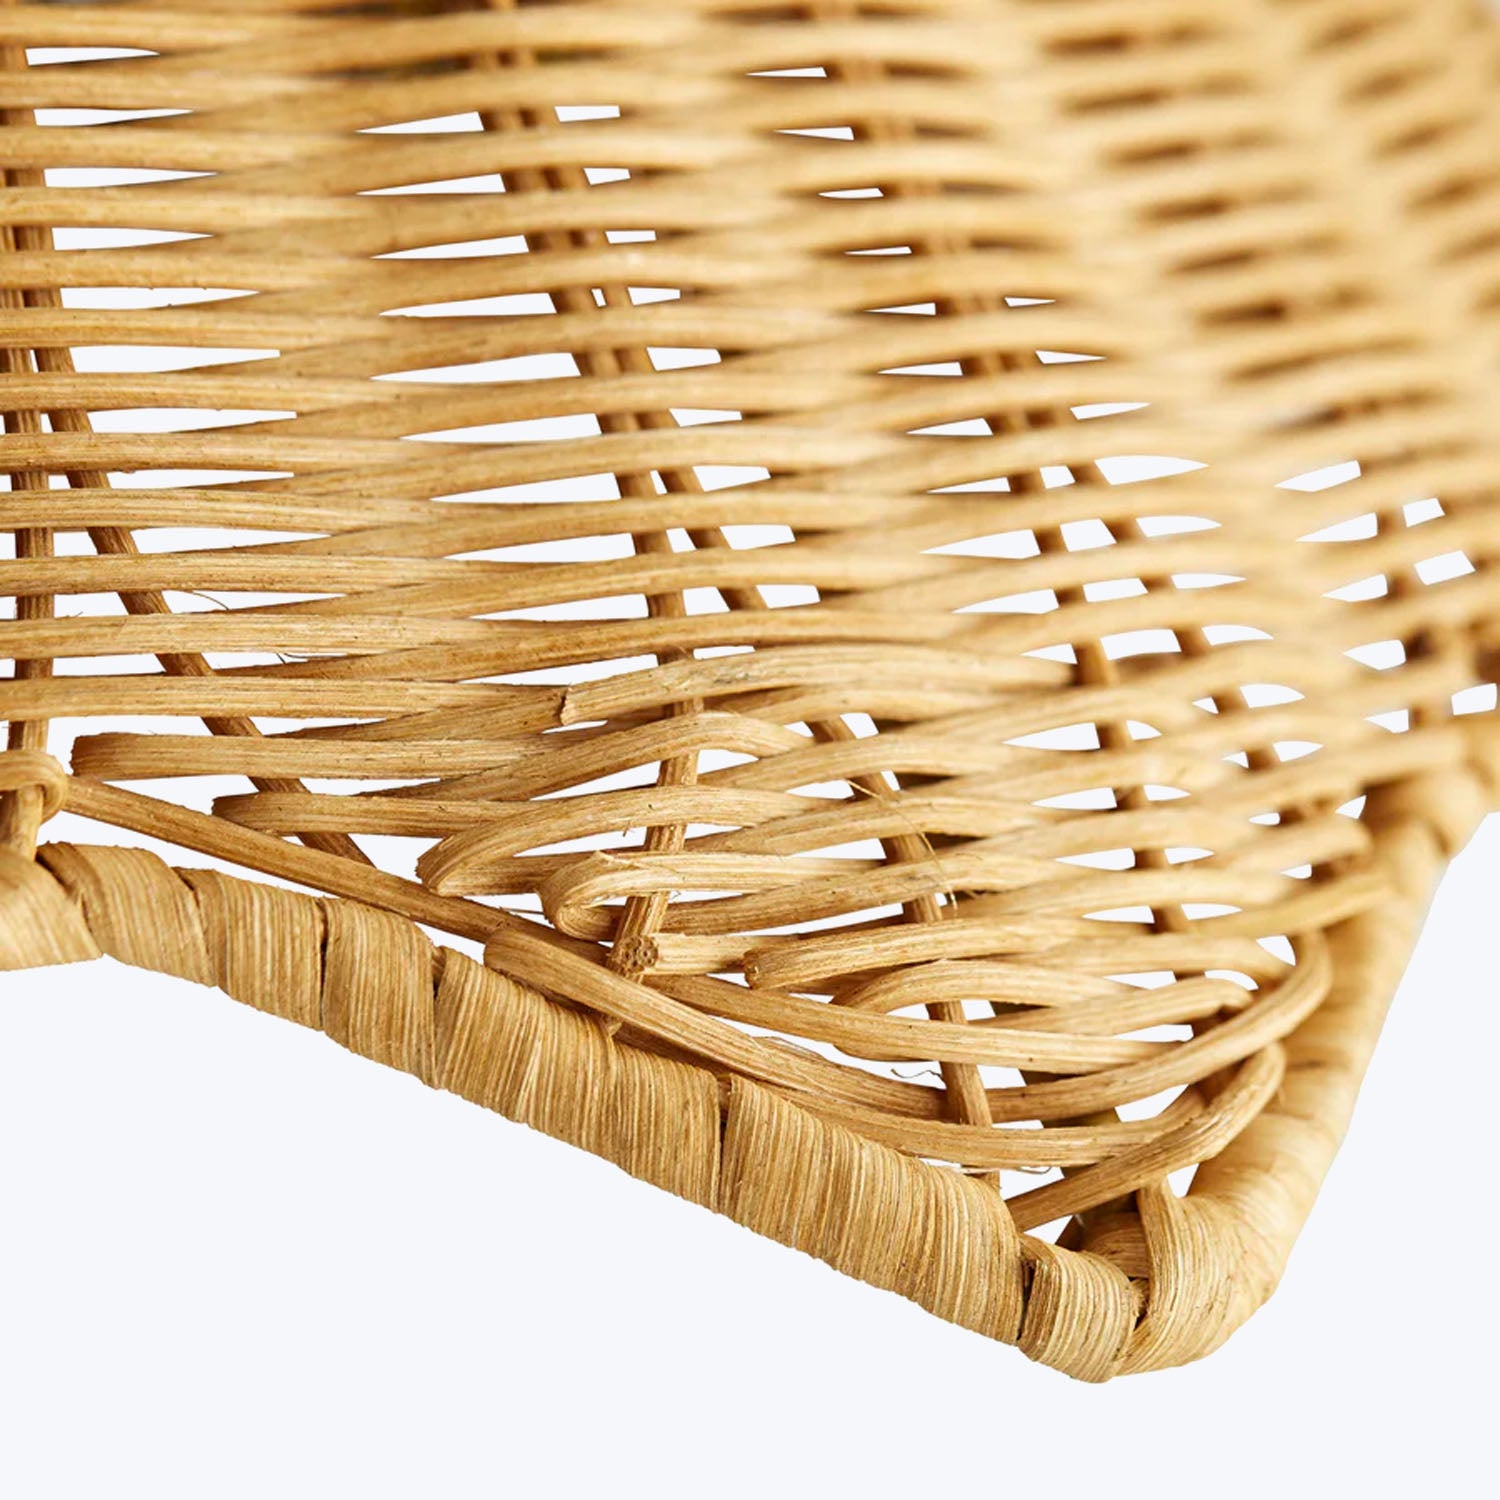 Close-up of a beautifully woven wicker object, showcasing intricate craftsmanship.